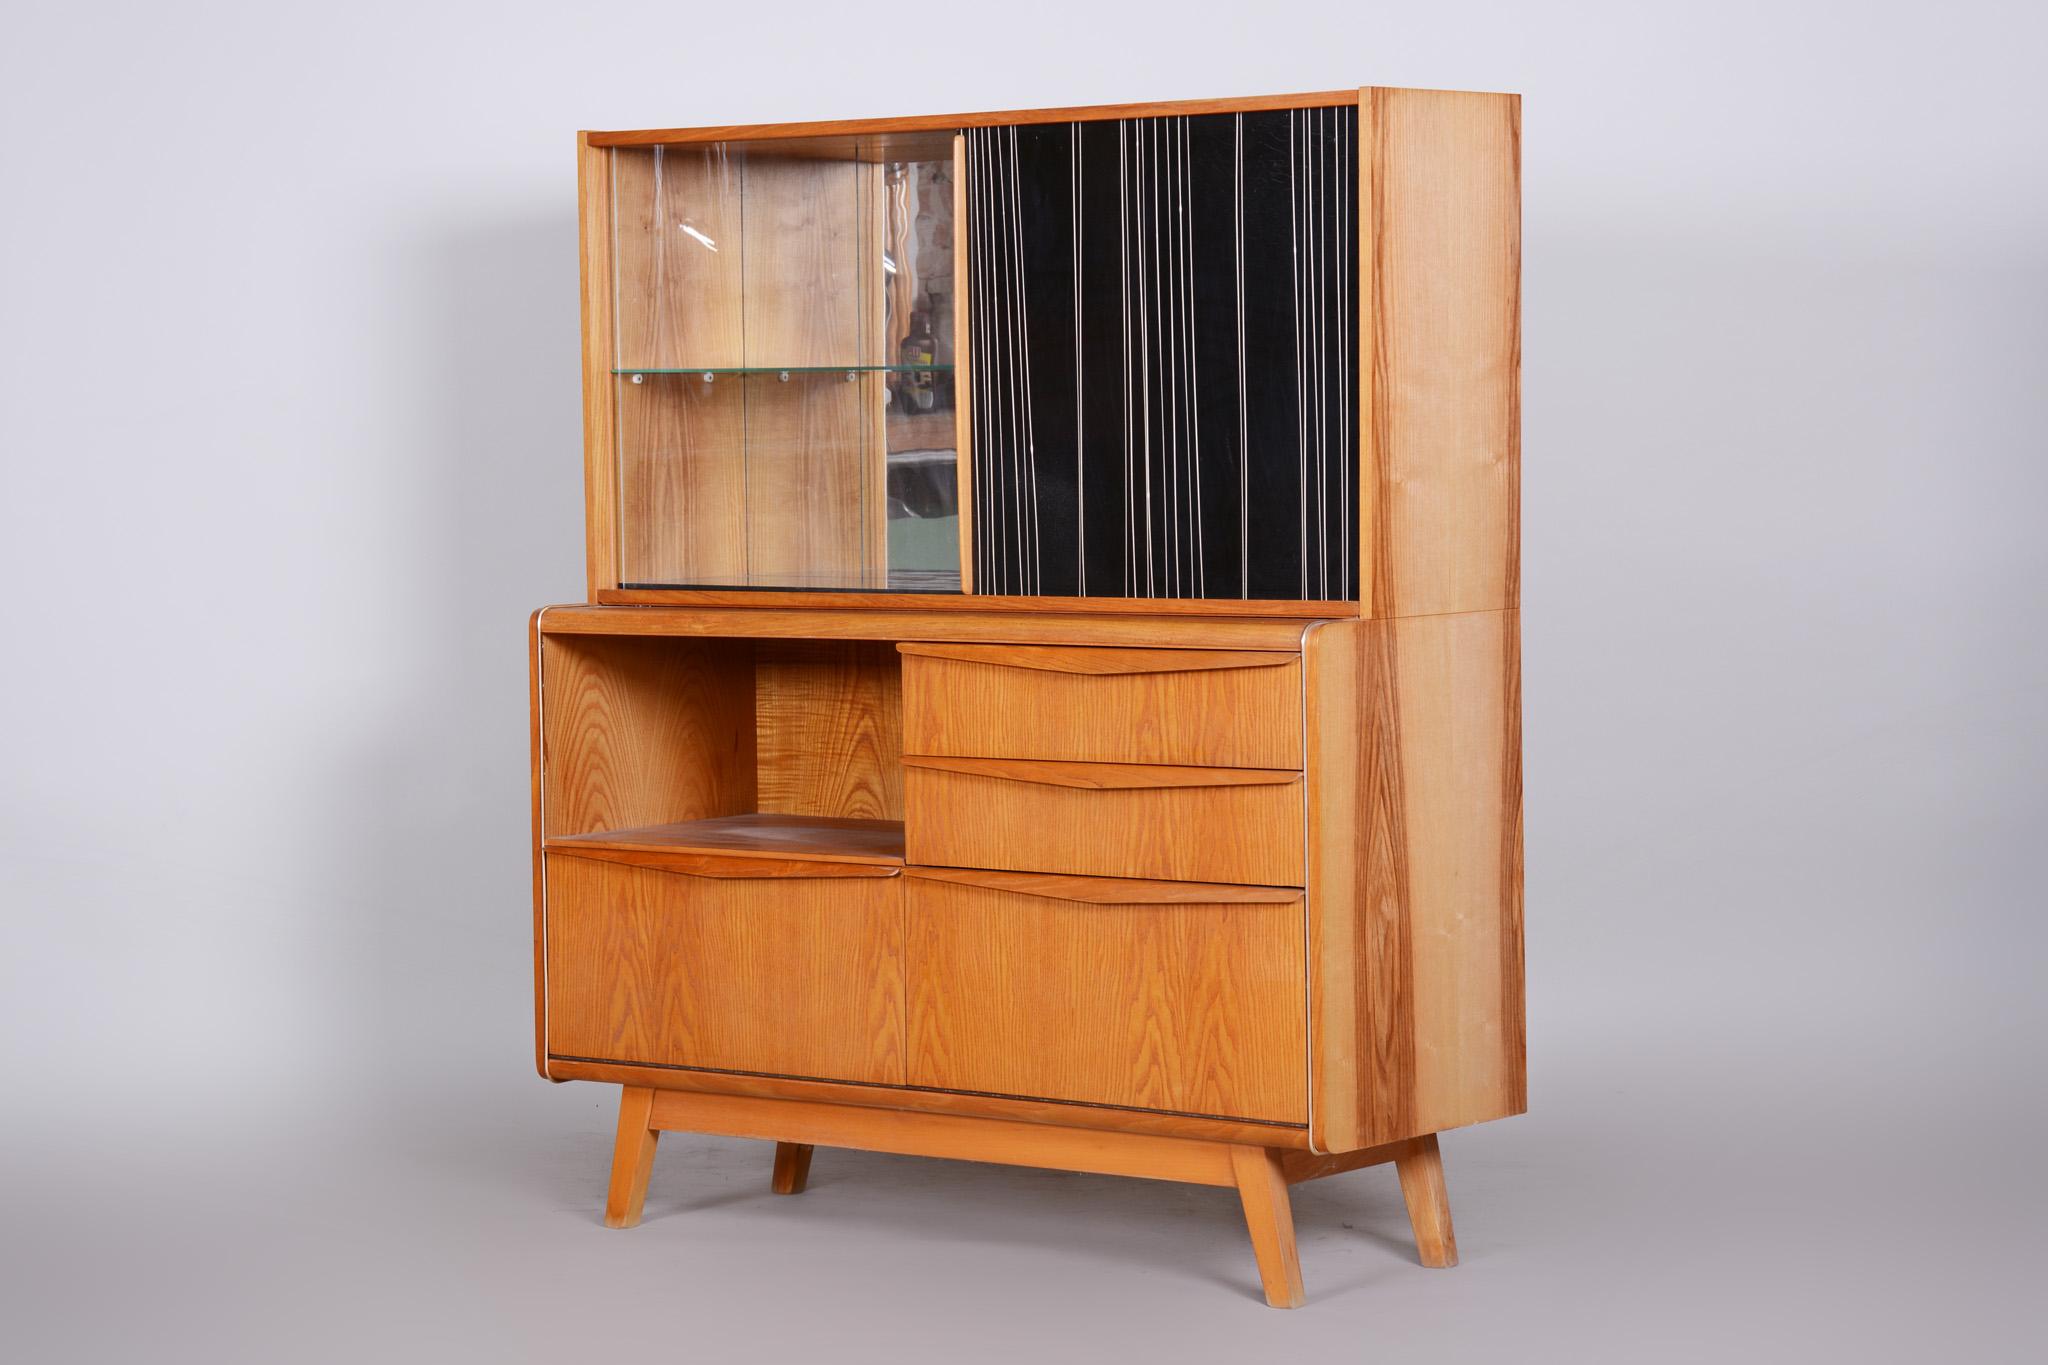 Czech Mid-Century Sideboard, 1950s, Well Preserved, Ash. JITONA Soběslav In Good Condition For Sale In Horomerice, CZ